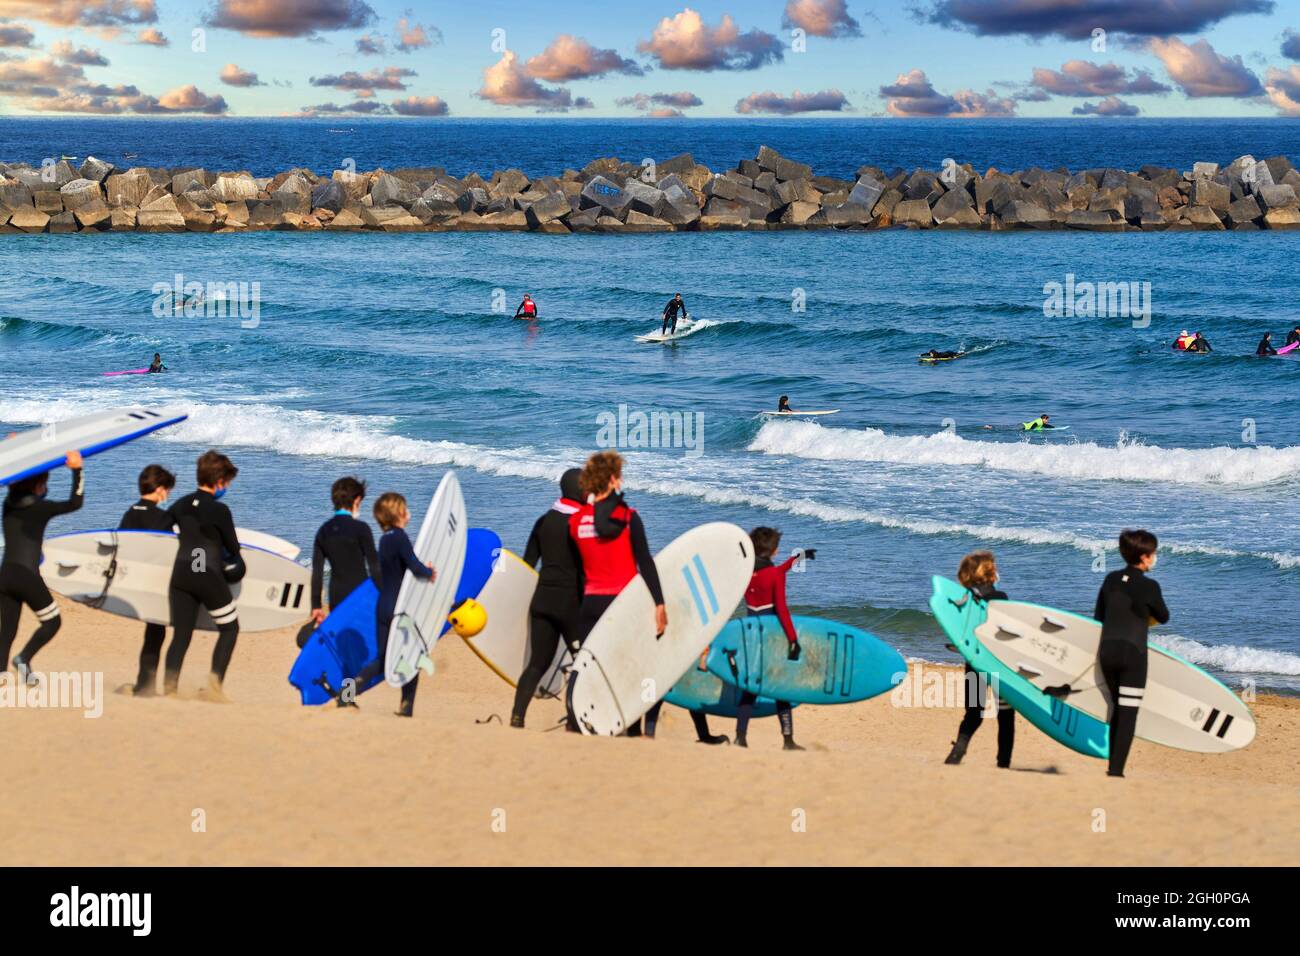 Group of young people take a surf lesson on La Zurriola beach, Donostia, San Sebastian, Basque Country, Spain, Europe. La Zurriola is the Stock Photo